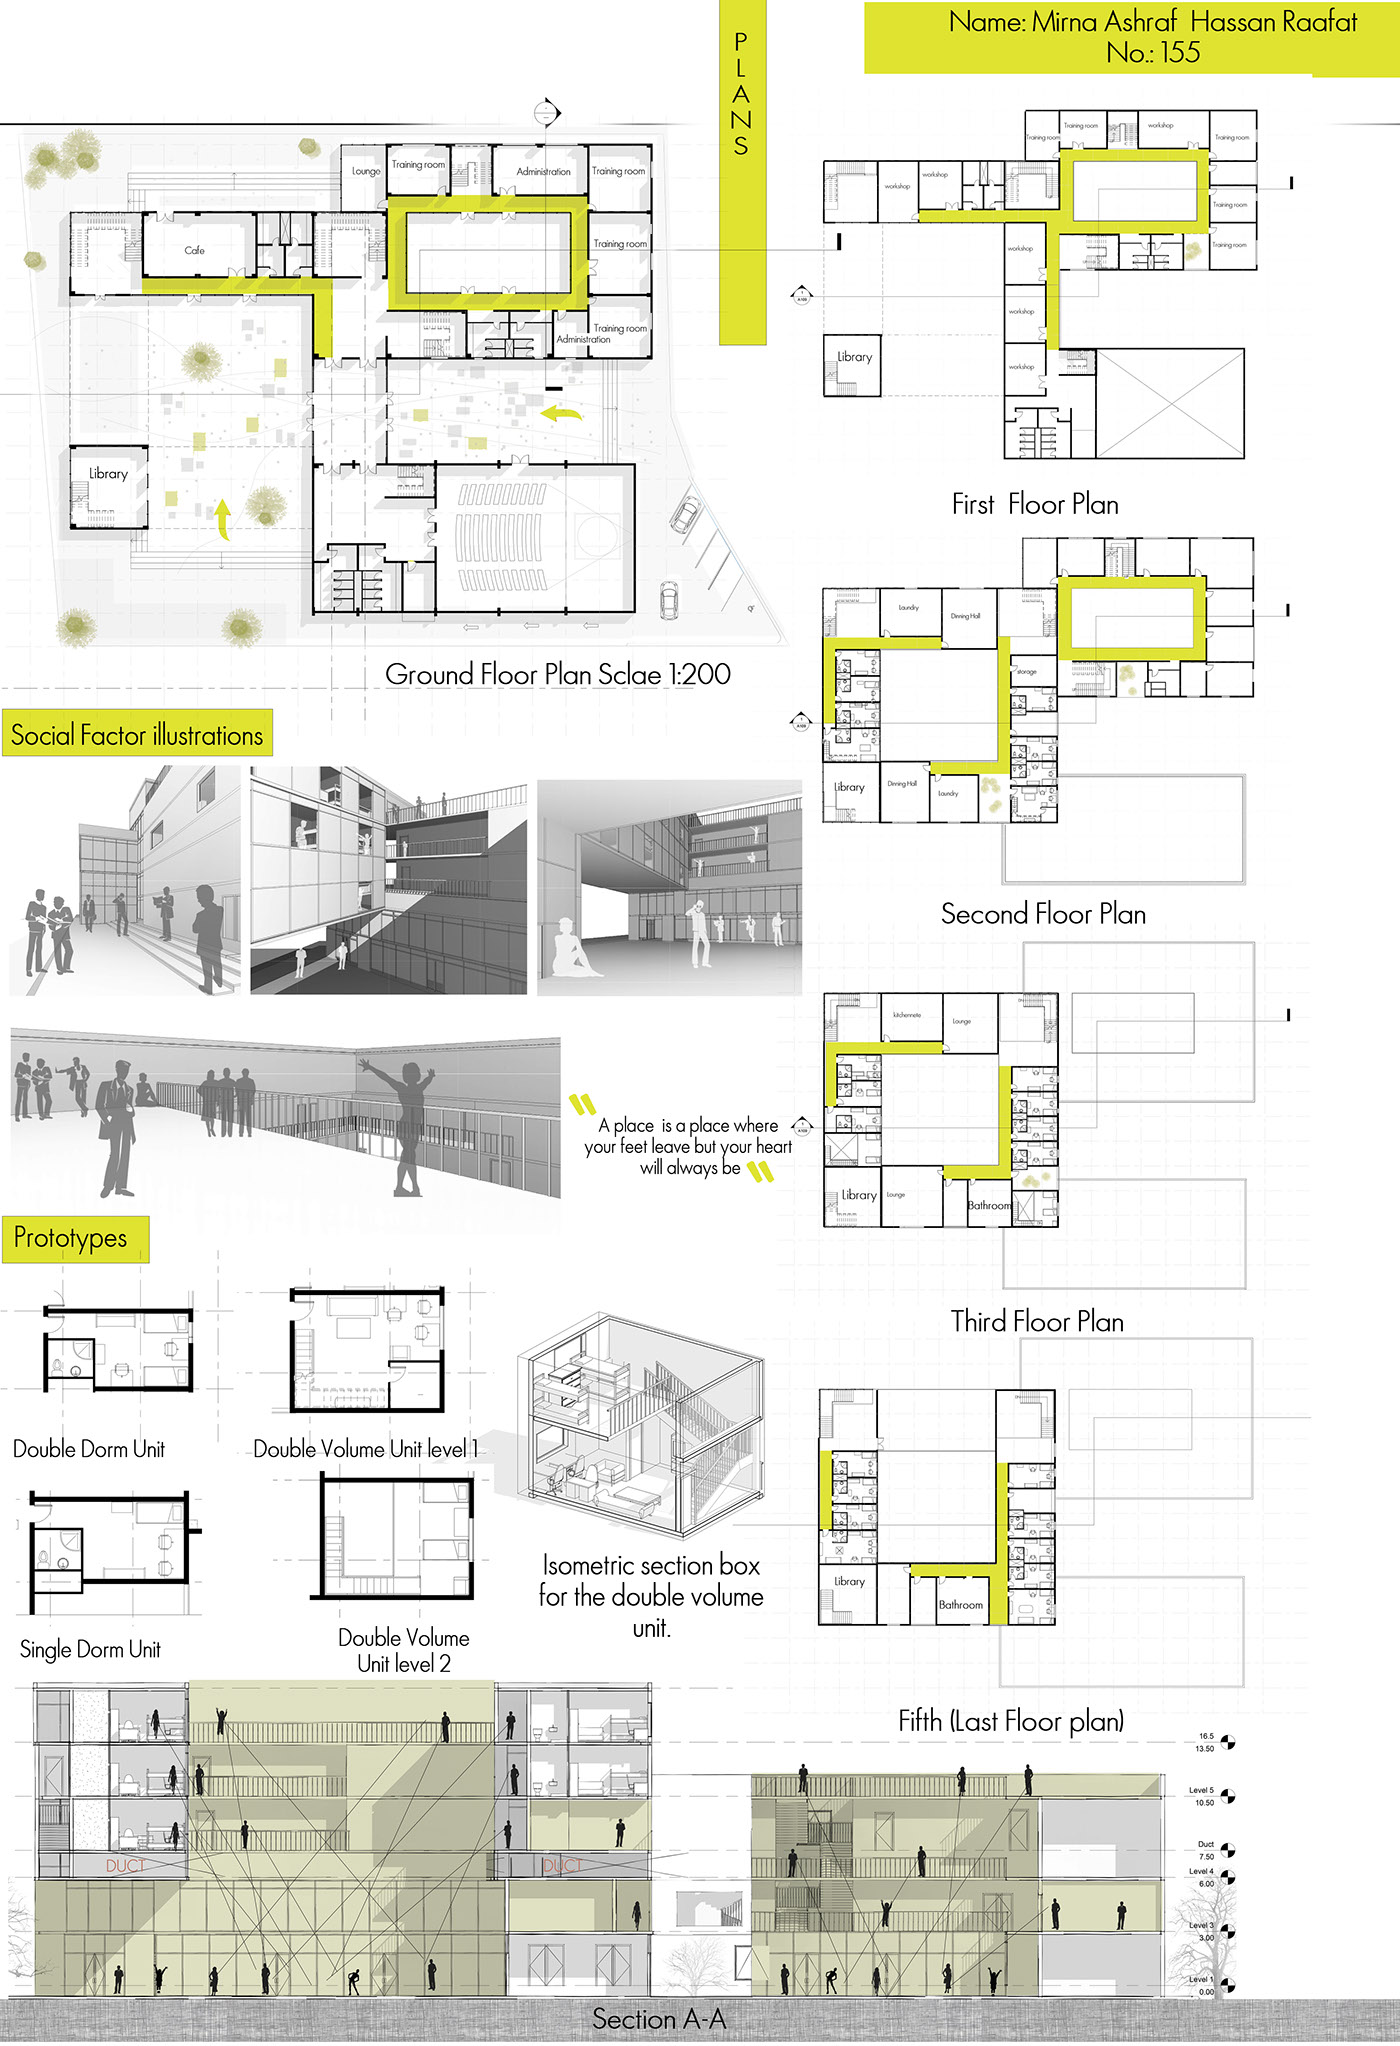 Dormitory social approach user experience courts residential architecture modules